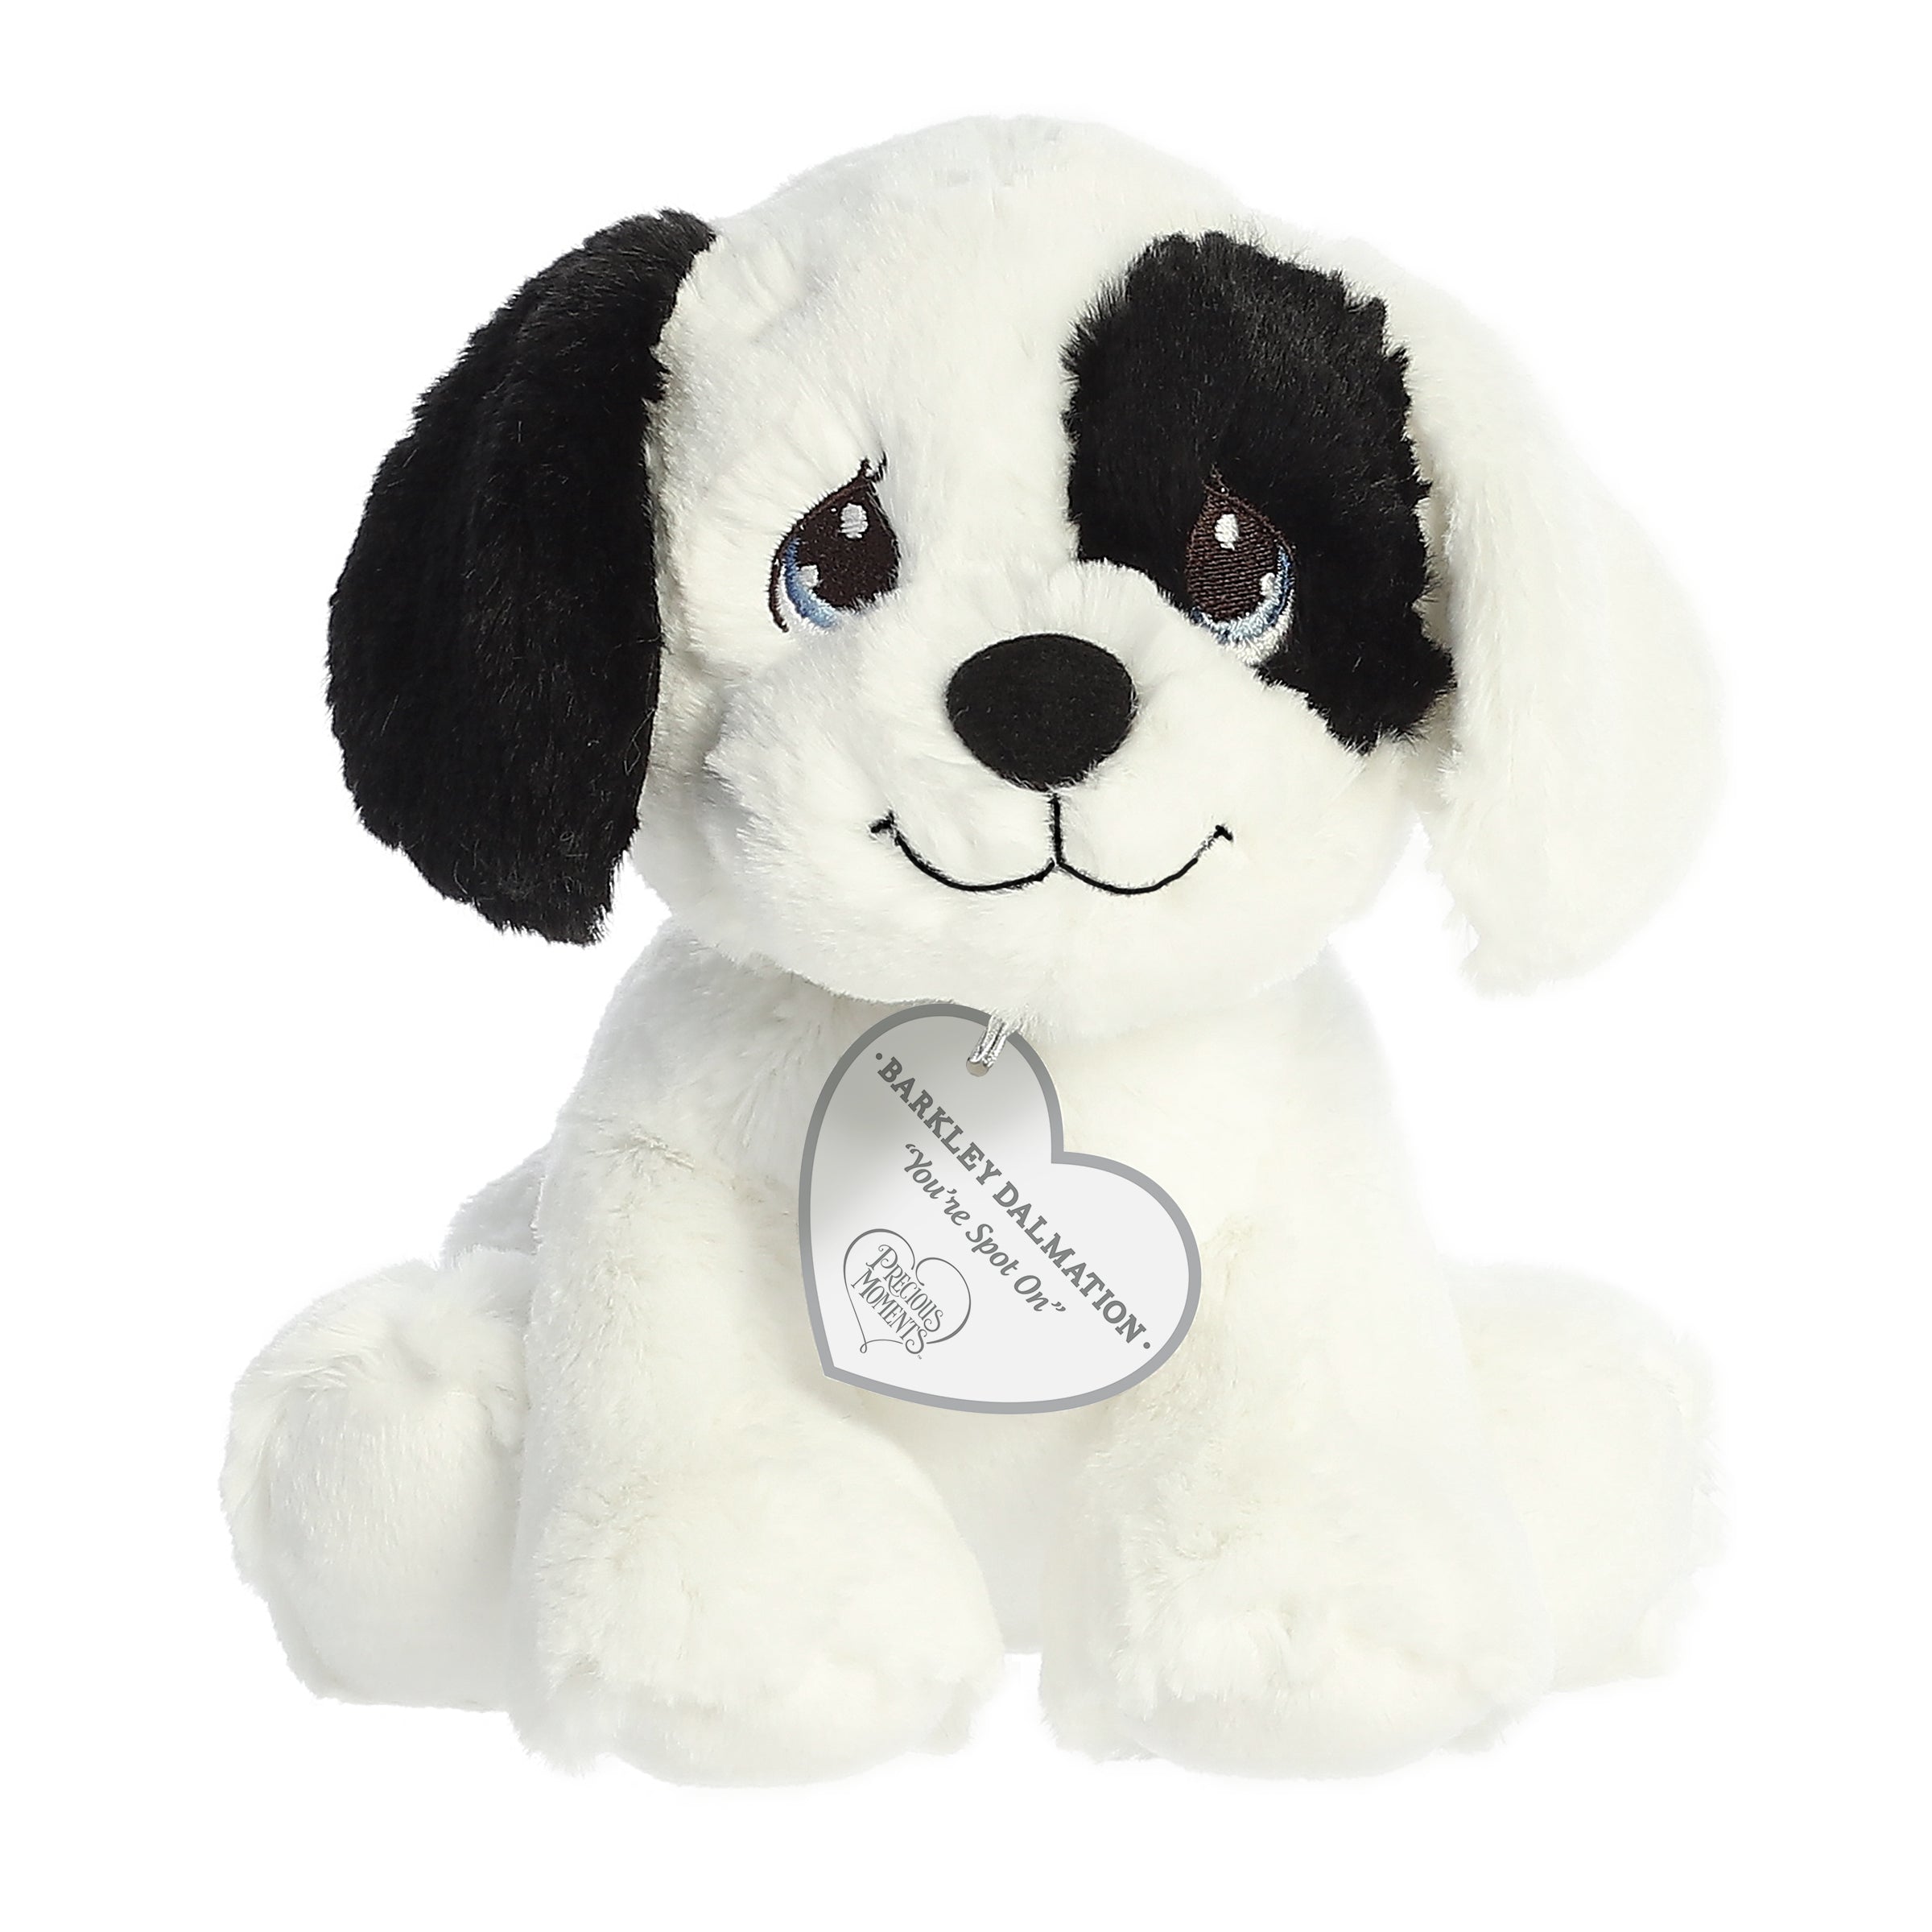 A sitting-down dalmation dog plush with tear-drop eyes and a precious moments inspirational tag around its neck.